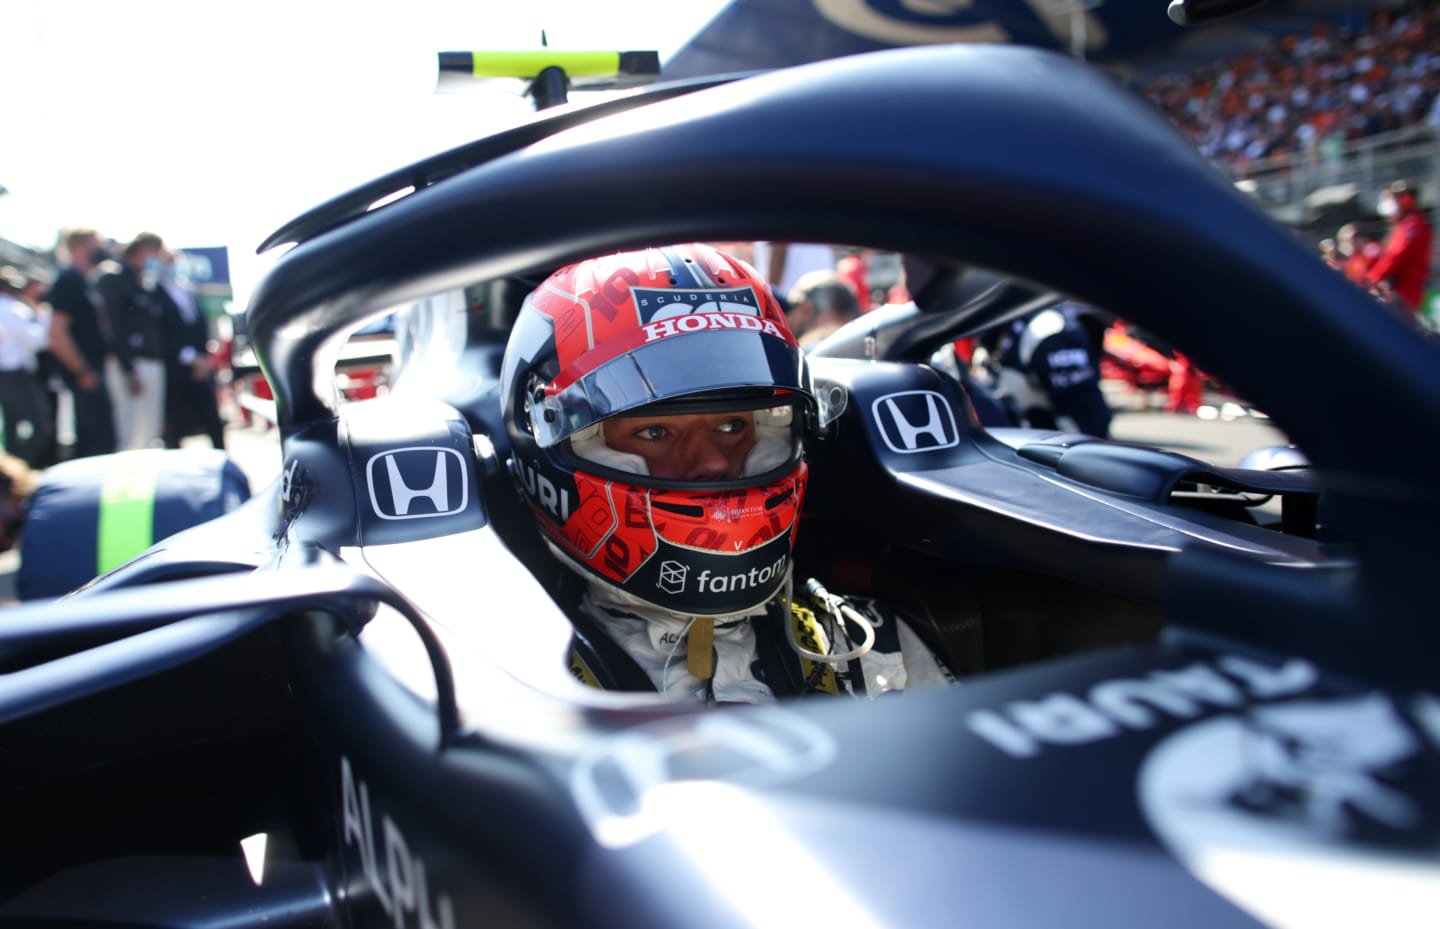 ZANDVOORT, NETHERLANDS - SEPTEMBER 05: Pierre Gasly of France and Scuderia AlphaTauri prepares to drive on the grid ahead of the F1 Grand Prix of The Netherlands at Circuit Zandvoort on September 05, 2021 in Zandvoort, Netherlands. (Photo by Peter Fox/Getty Images)